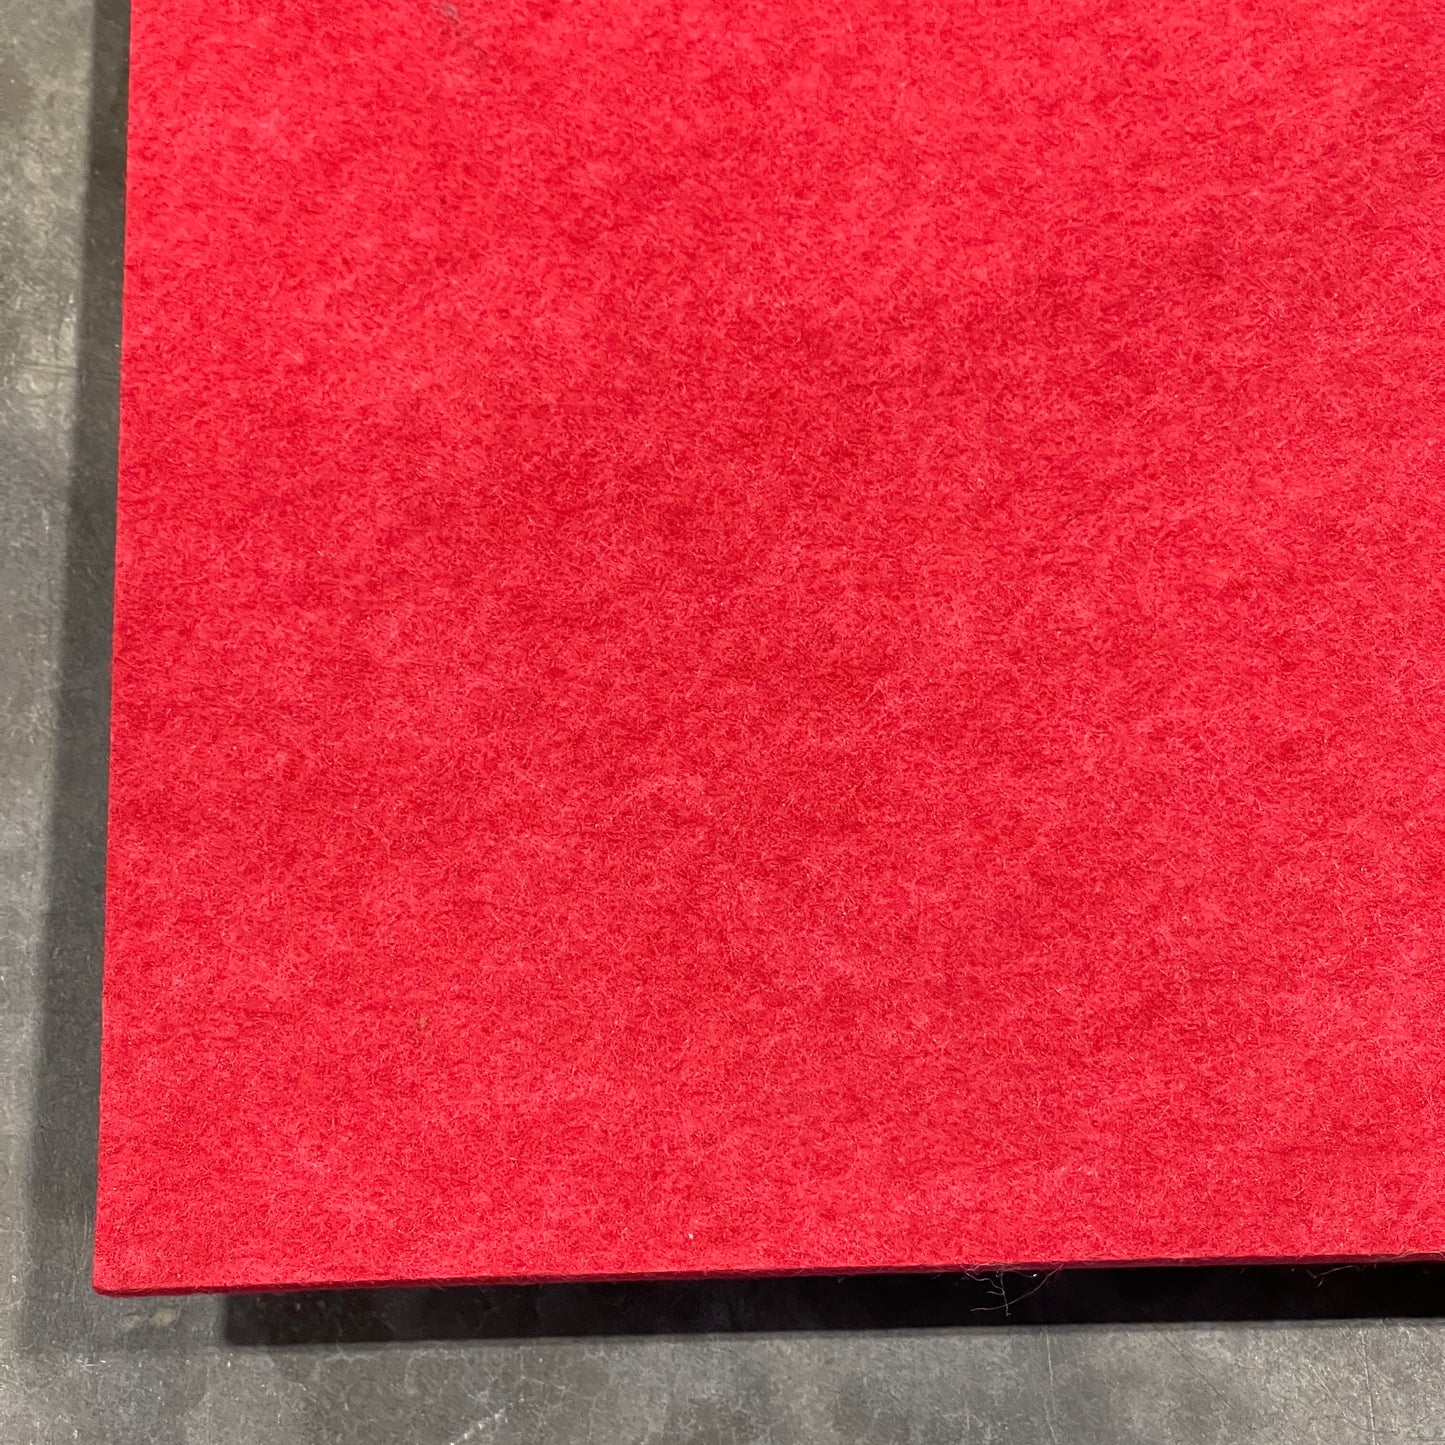 3FORM Sola Felt Sound-Absorbing Panels 3/16" X 48.4" X 96.4" Inactive Ruby (New)